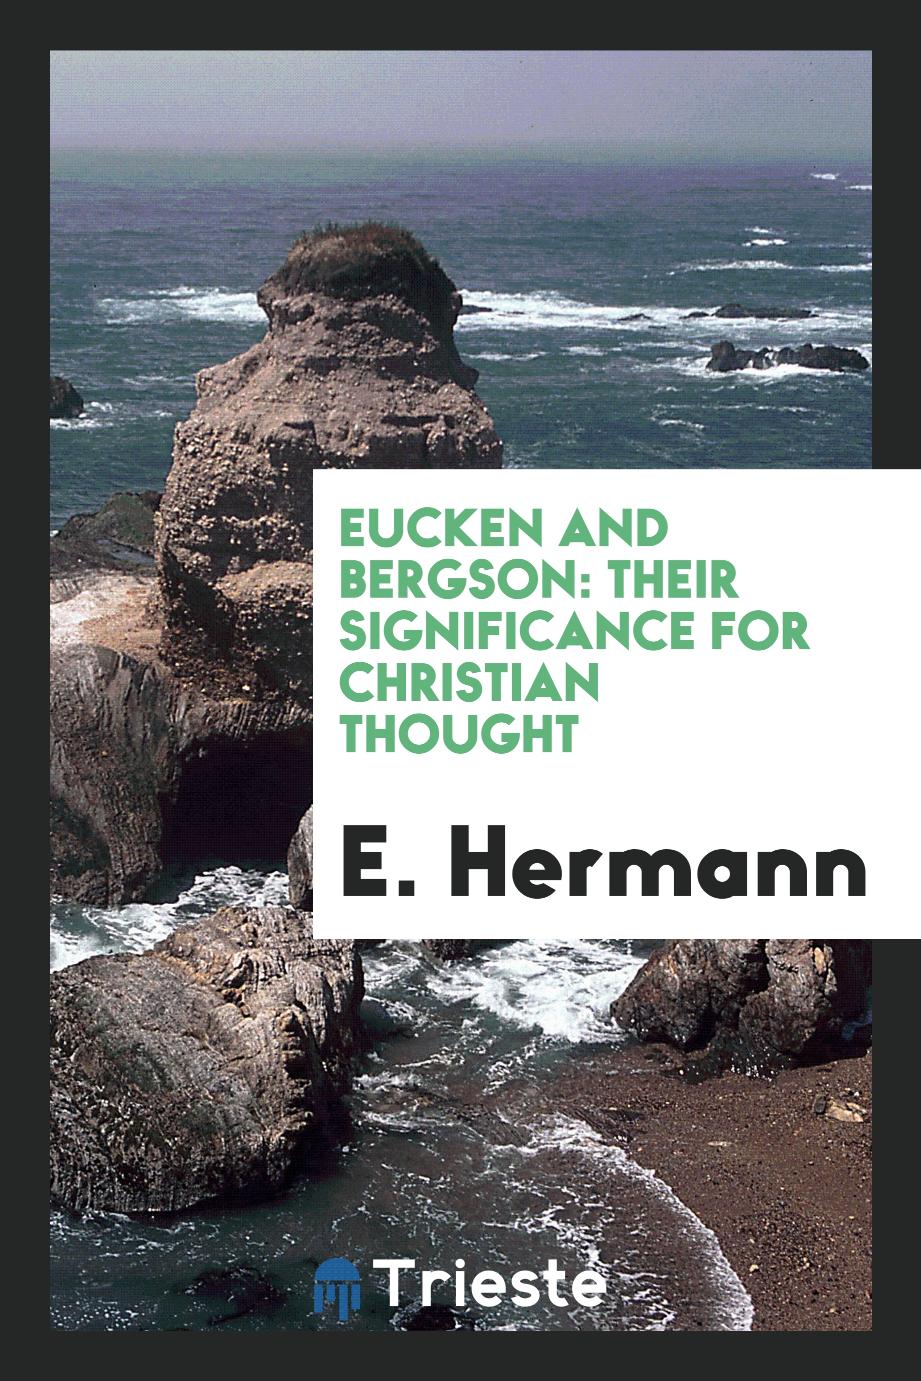 Eucken and Bergson: their significance for Christian thought